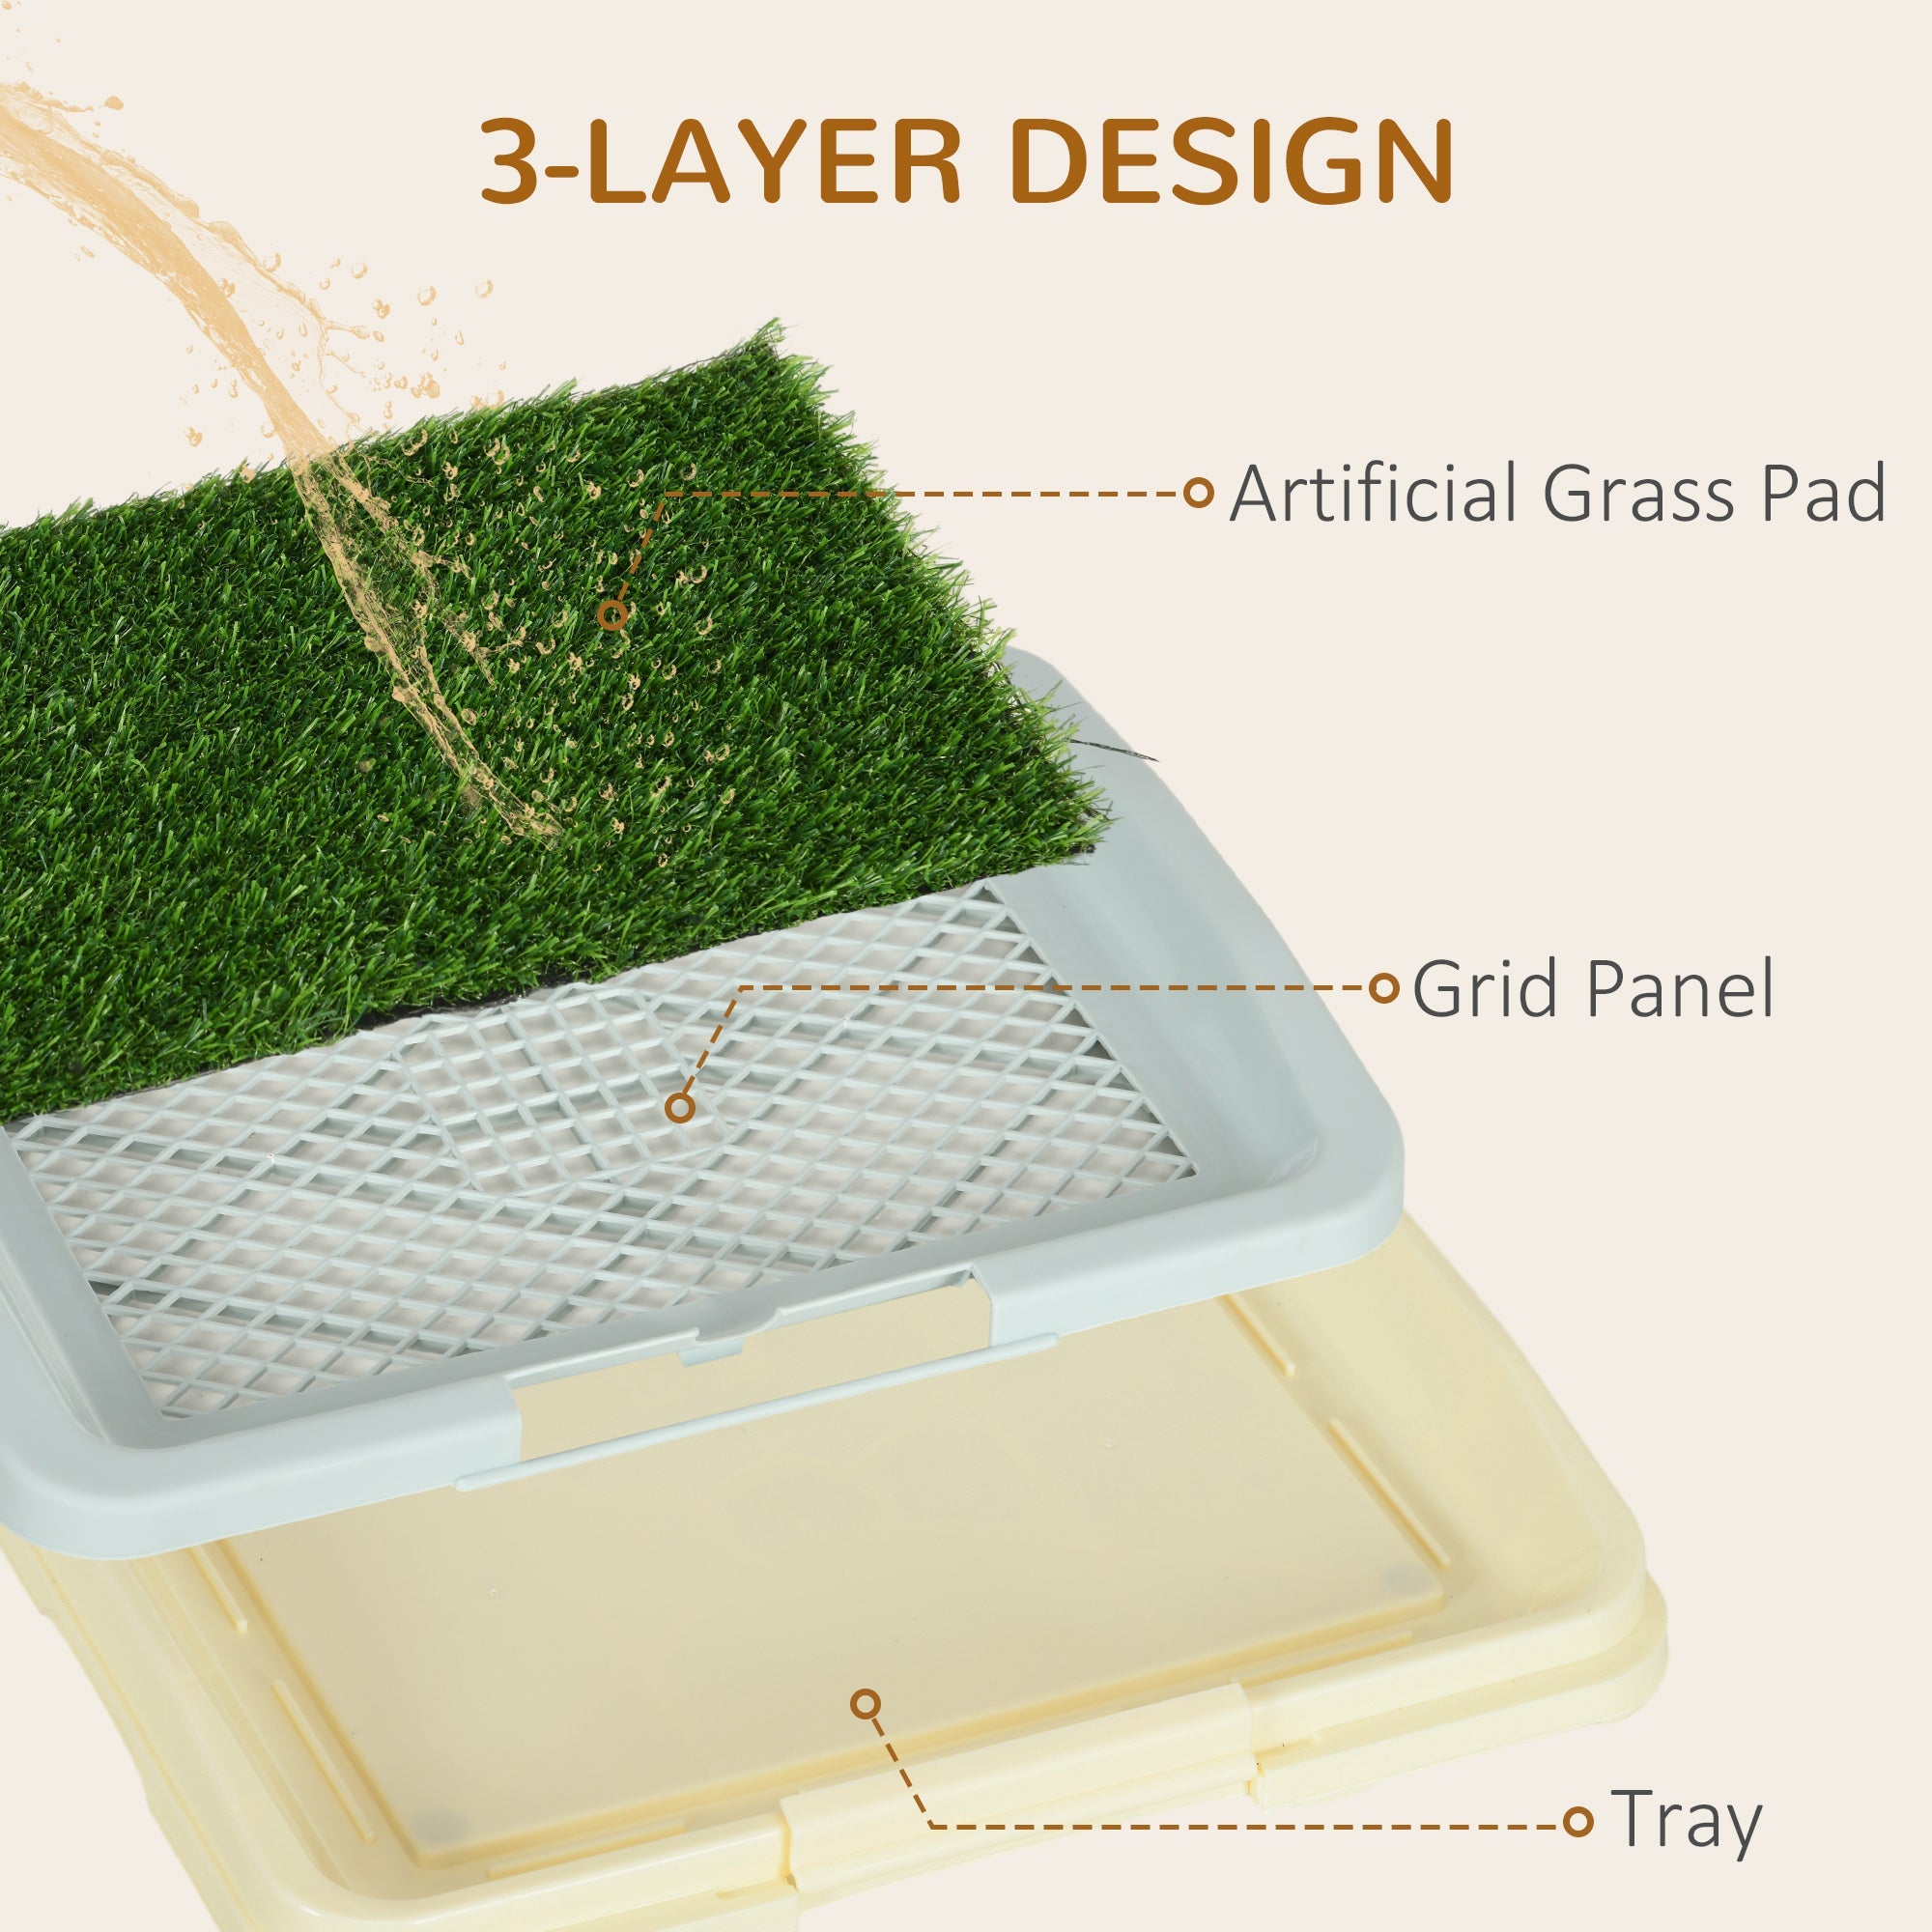 Puppy Training Pad Indoor Portable Puppy Pee Pad with Artificial Grass, Grid Panel, Tray, 46.5 x 34cm-4